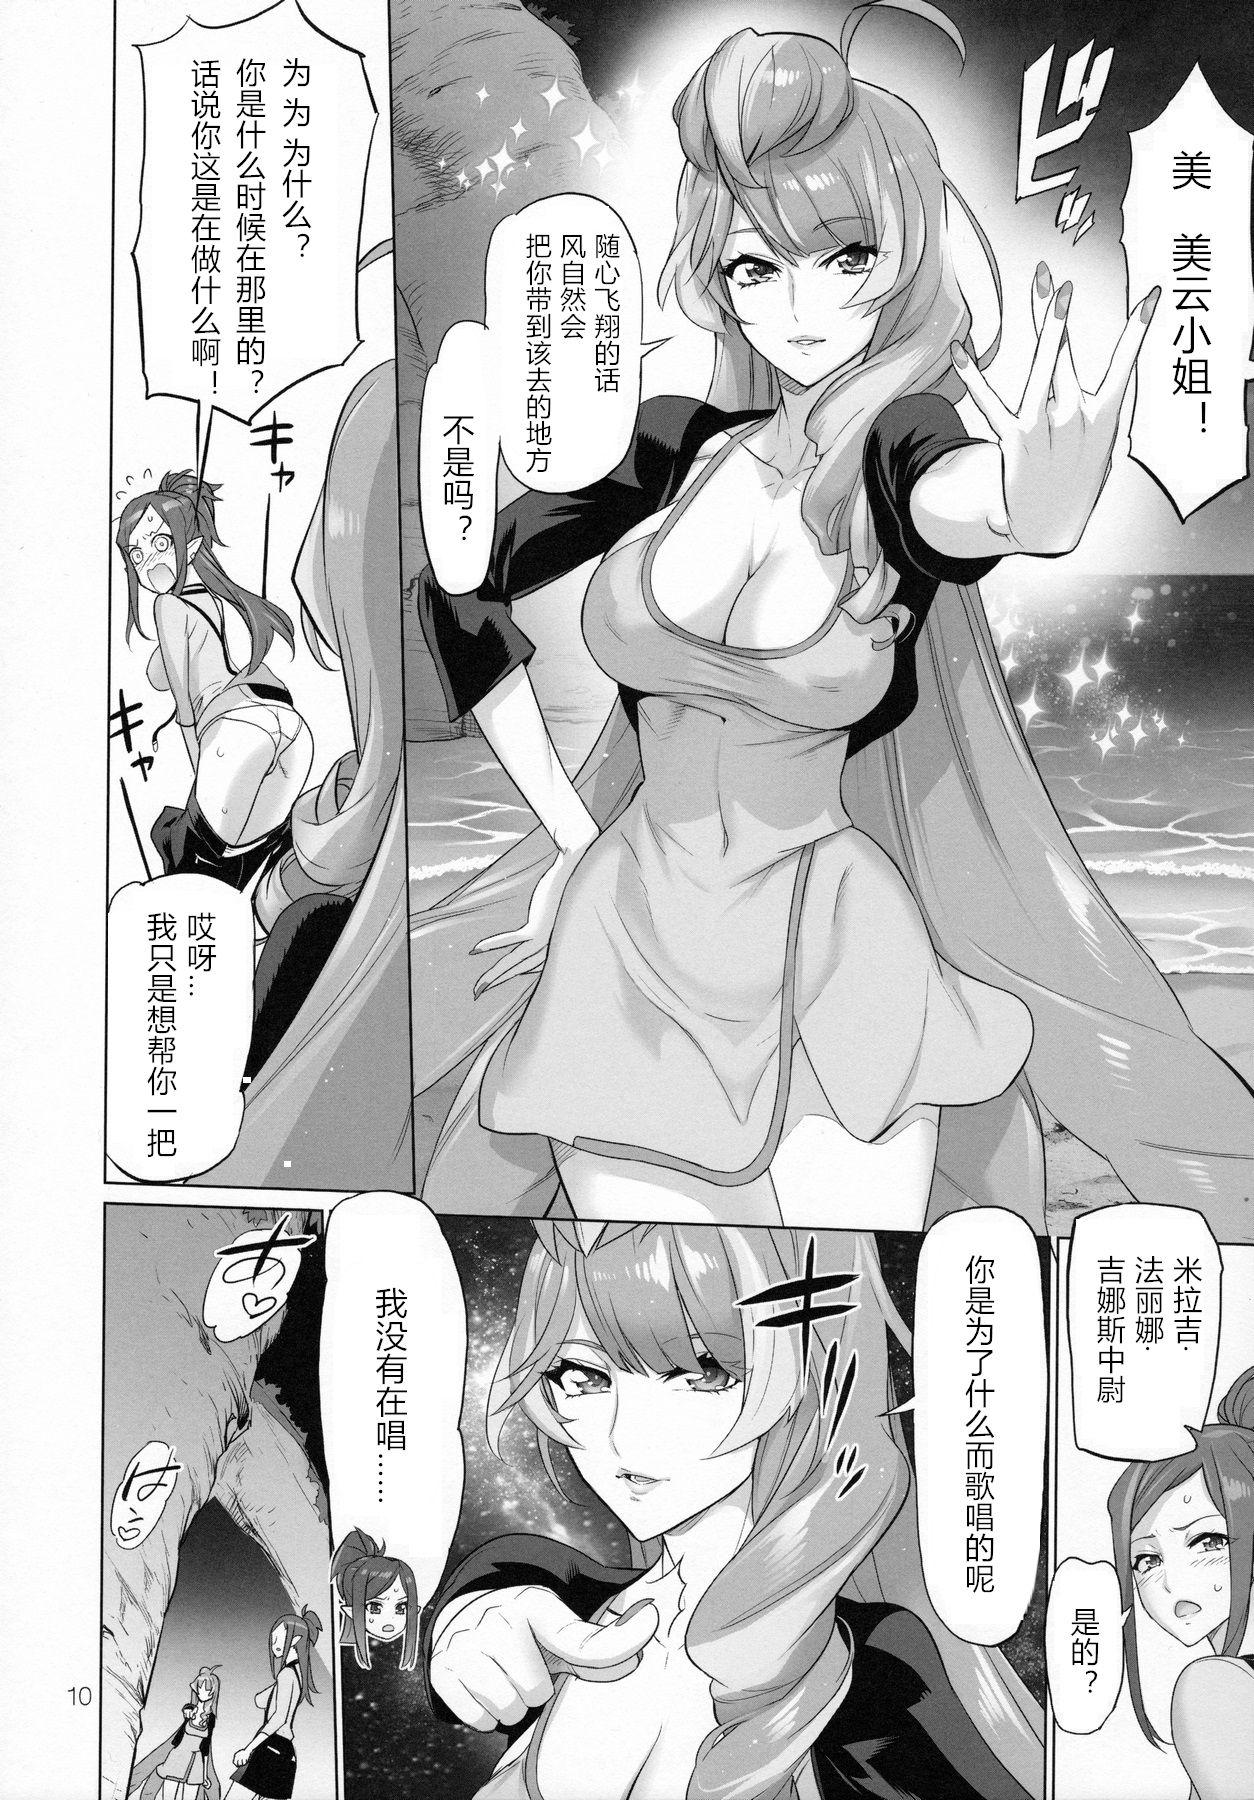 Hot Mom Mirage Attack! - Macross delta Real Amateur - Page 9